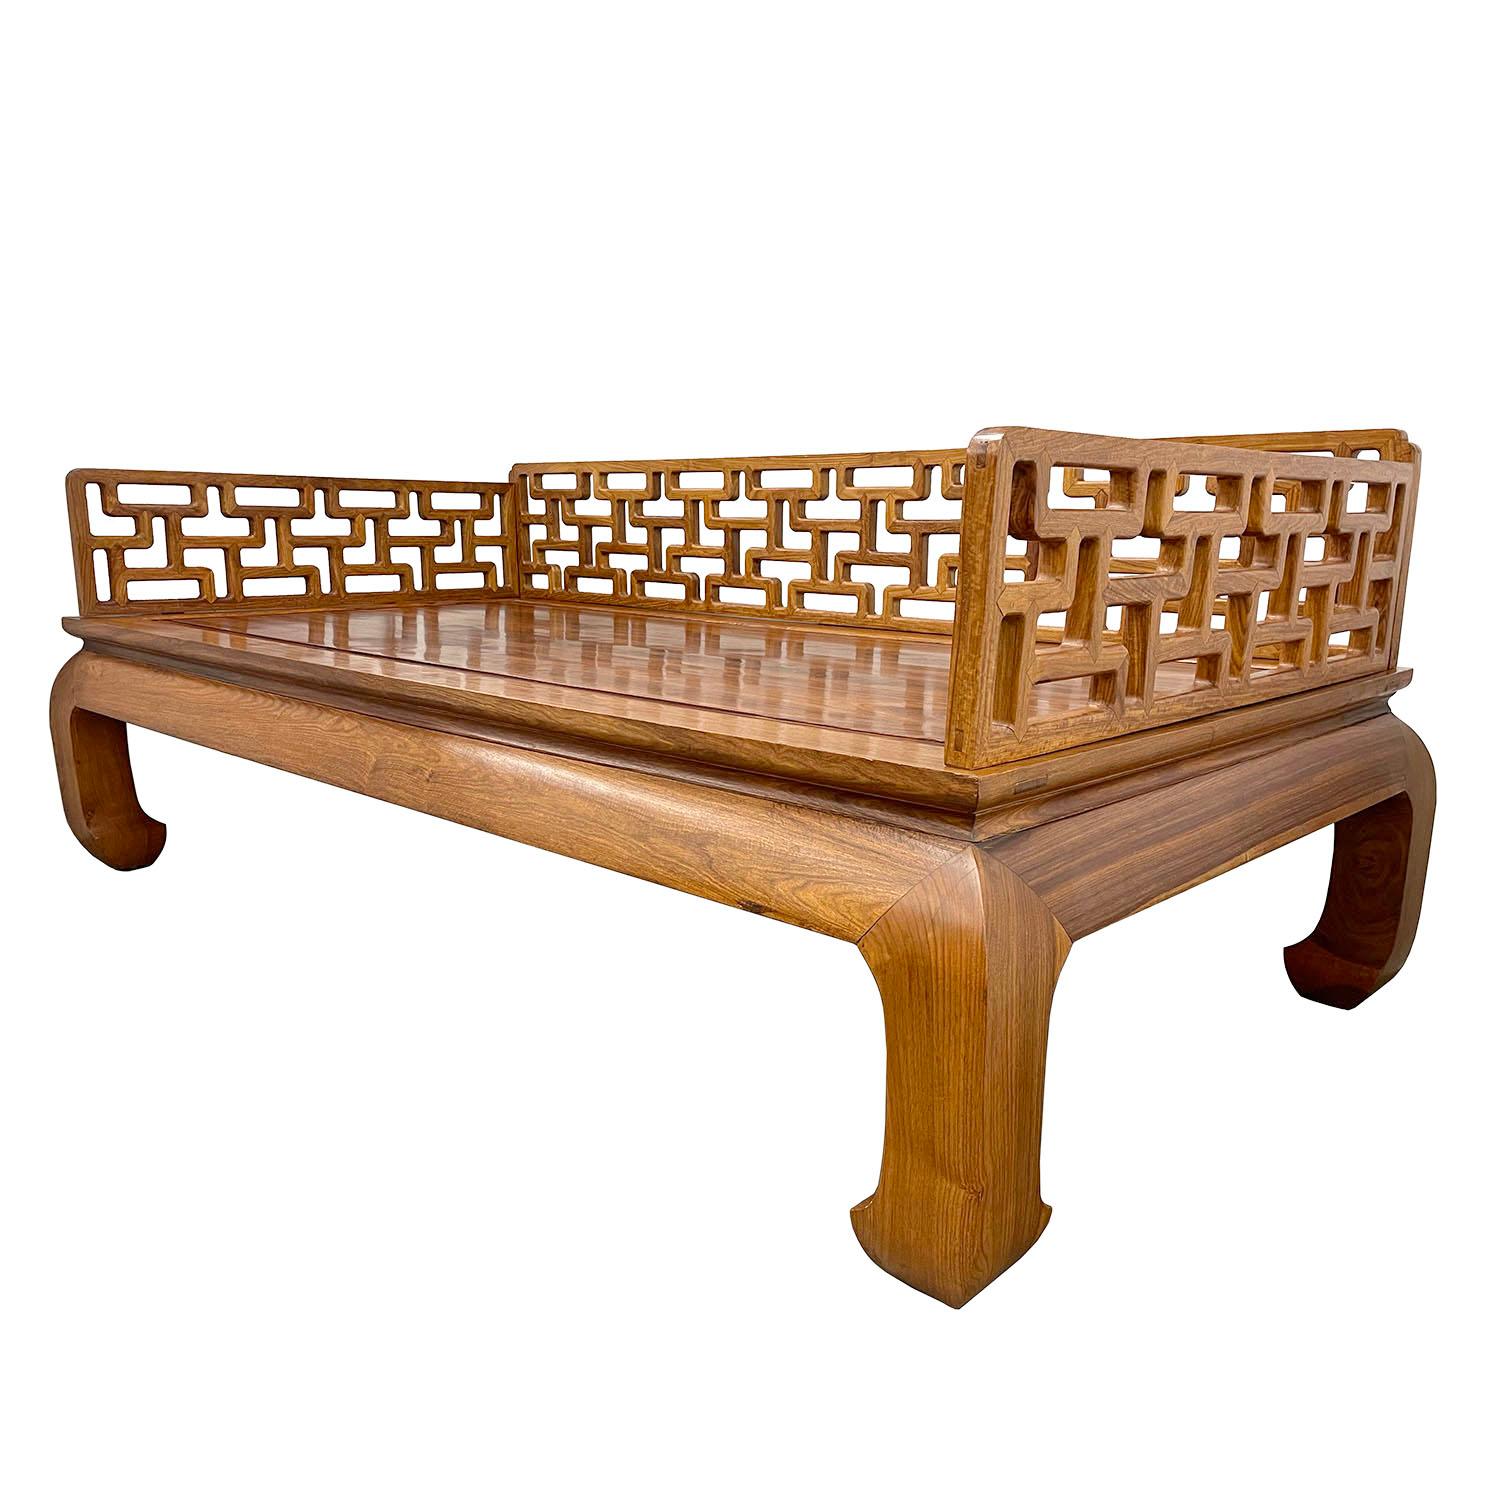 Size: 31.5in H x 84in W x 44in D
Bed: 19.5in H x 77.5in W x 39.5in D
Origin: China
Circa: 1950's
Material: Hua Li wood (Rosewood)
Condition: Original Finish. Solid wood construction, hand carved.Very heavy and sturdy, Normal age wear.

Description: